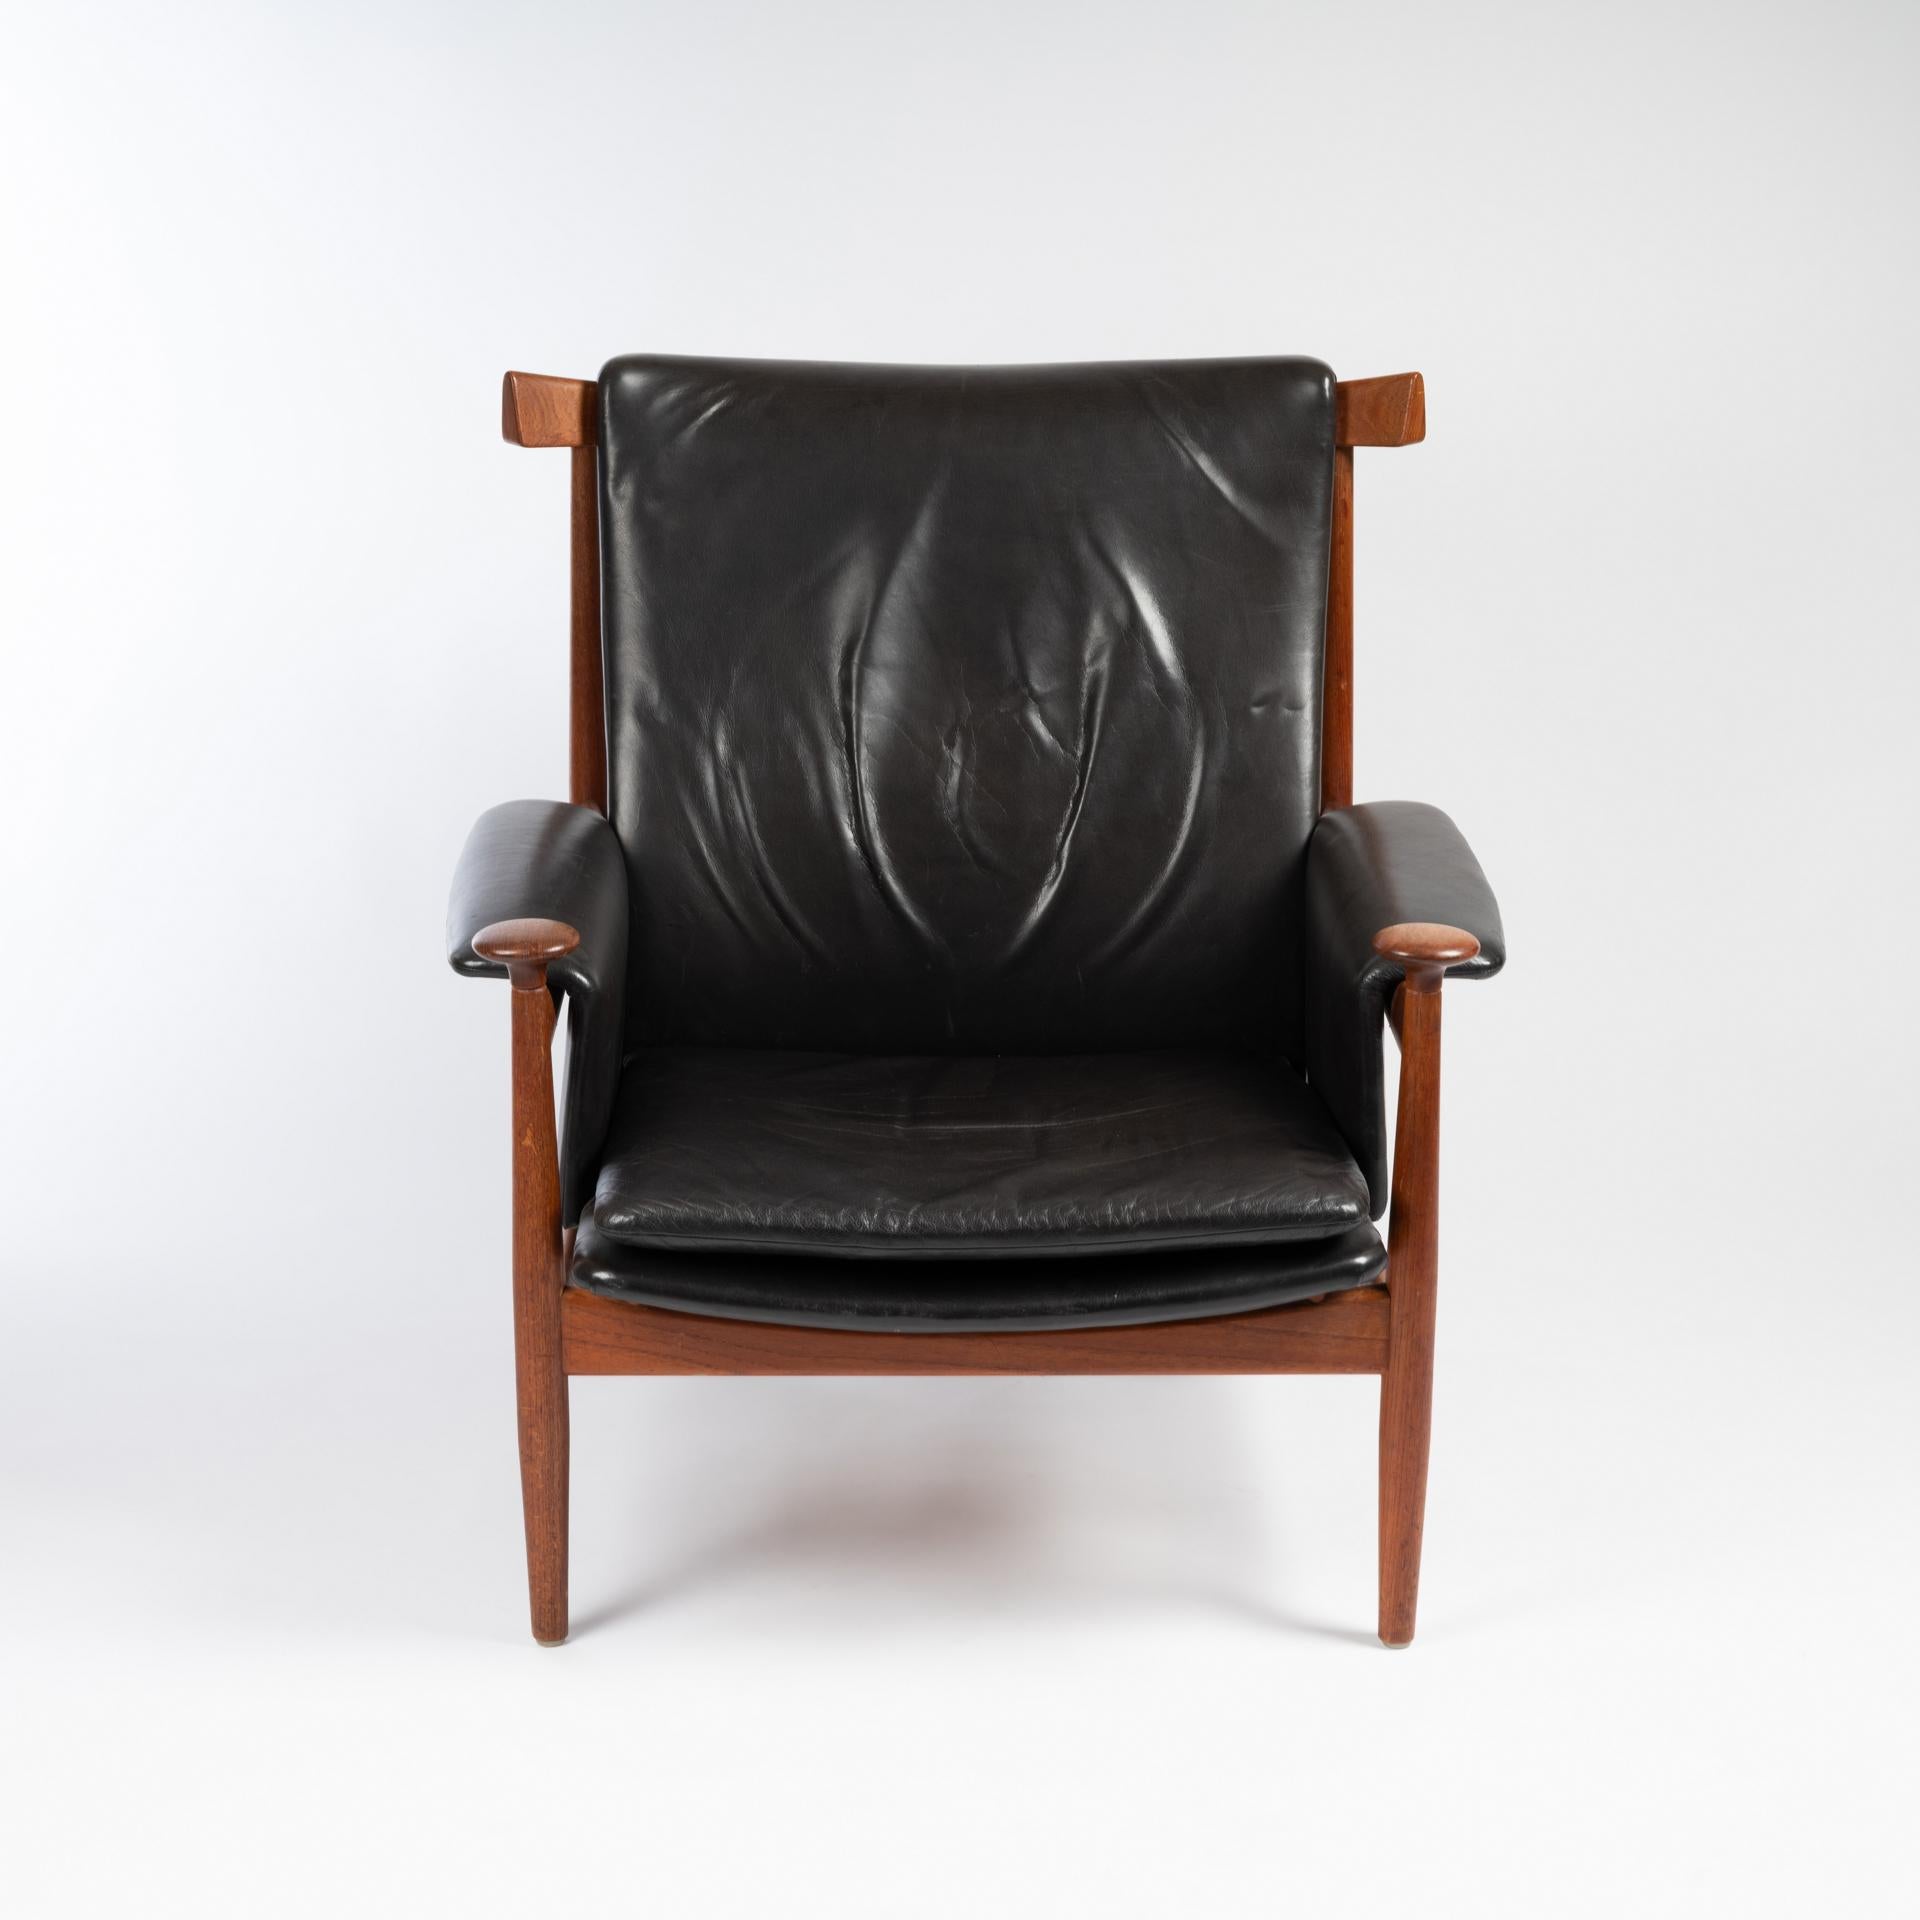 Leather Lounge Chair Model 152 Bwana by Finn Juhl for France & Sons, 1962 For Sale